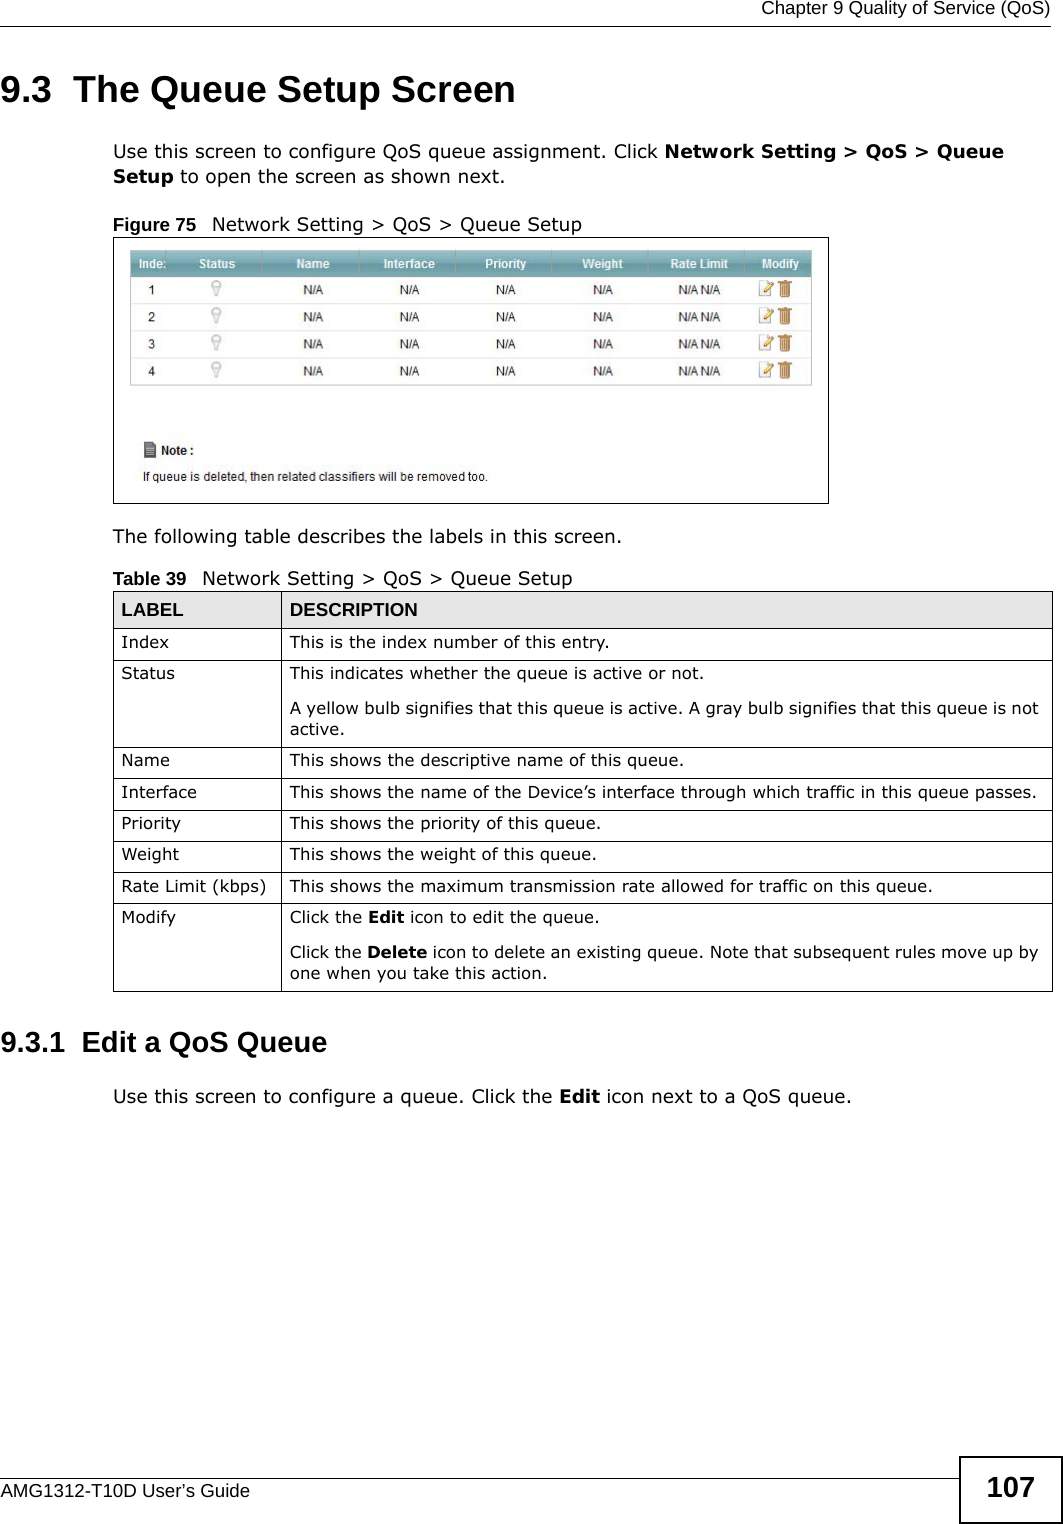  Chapter 9 Quality of Service (QoS)AMG1312-T10D User’s Guide 1079.3  The Queue Setup ScreenUse this screen to configure QoS queue assignment. Click Network Setting &gt; QoS &gt; Queue Setup to open the screen as shown next. Figure 75   Network Setting &gt; QoS &gt; Queue Setup The following table describes the labels in this screen. 9.3.1  Edit a QoS Queue Use this screen to configure a queue. Click the Edit icon next to a QoS queue. Table 39   Network Setting &gt; QoS &gt; Queue SetupLABEL DESCRIPTIONIndex This is the index number of this entry.Status This indicates whether the queue is active or not.A yellow bulb signifies that this queue is active. A gray bulb signifies that this queue is not active.Name This shows the descriptive name of this queue.Interface This shows the name of the Device’s interface through which traffic in this queue passes.Priority This shows the priority of this queue.Weight This shows the weight of this queue.Rate Limit (kbps) This shows the maximum transmission rate allowed for traffic on this queue.Modify Click the Edit icon to edit the queue.Click the Delete icon to delete an existing queue. Note that subsequent rules move up by one when you take this action.